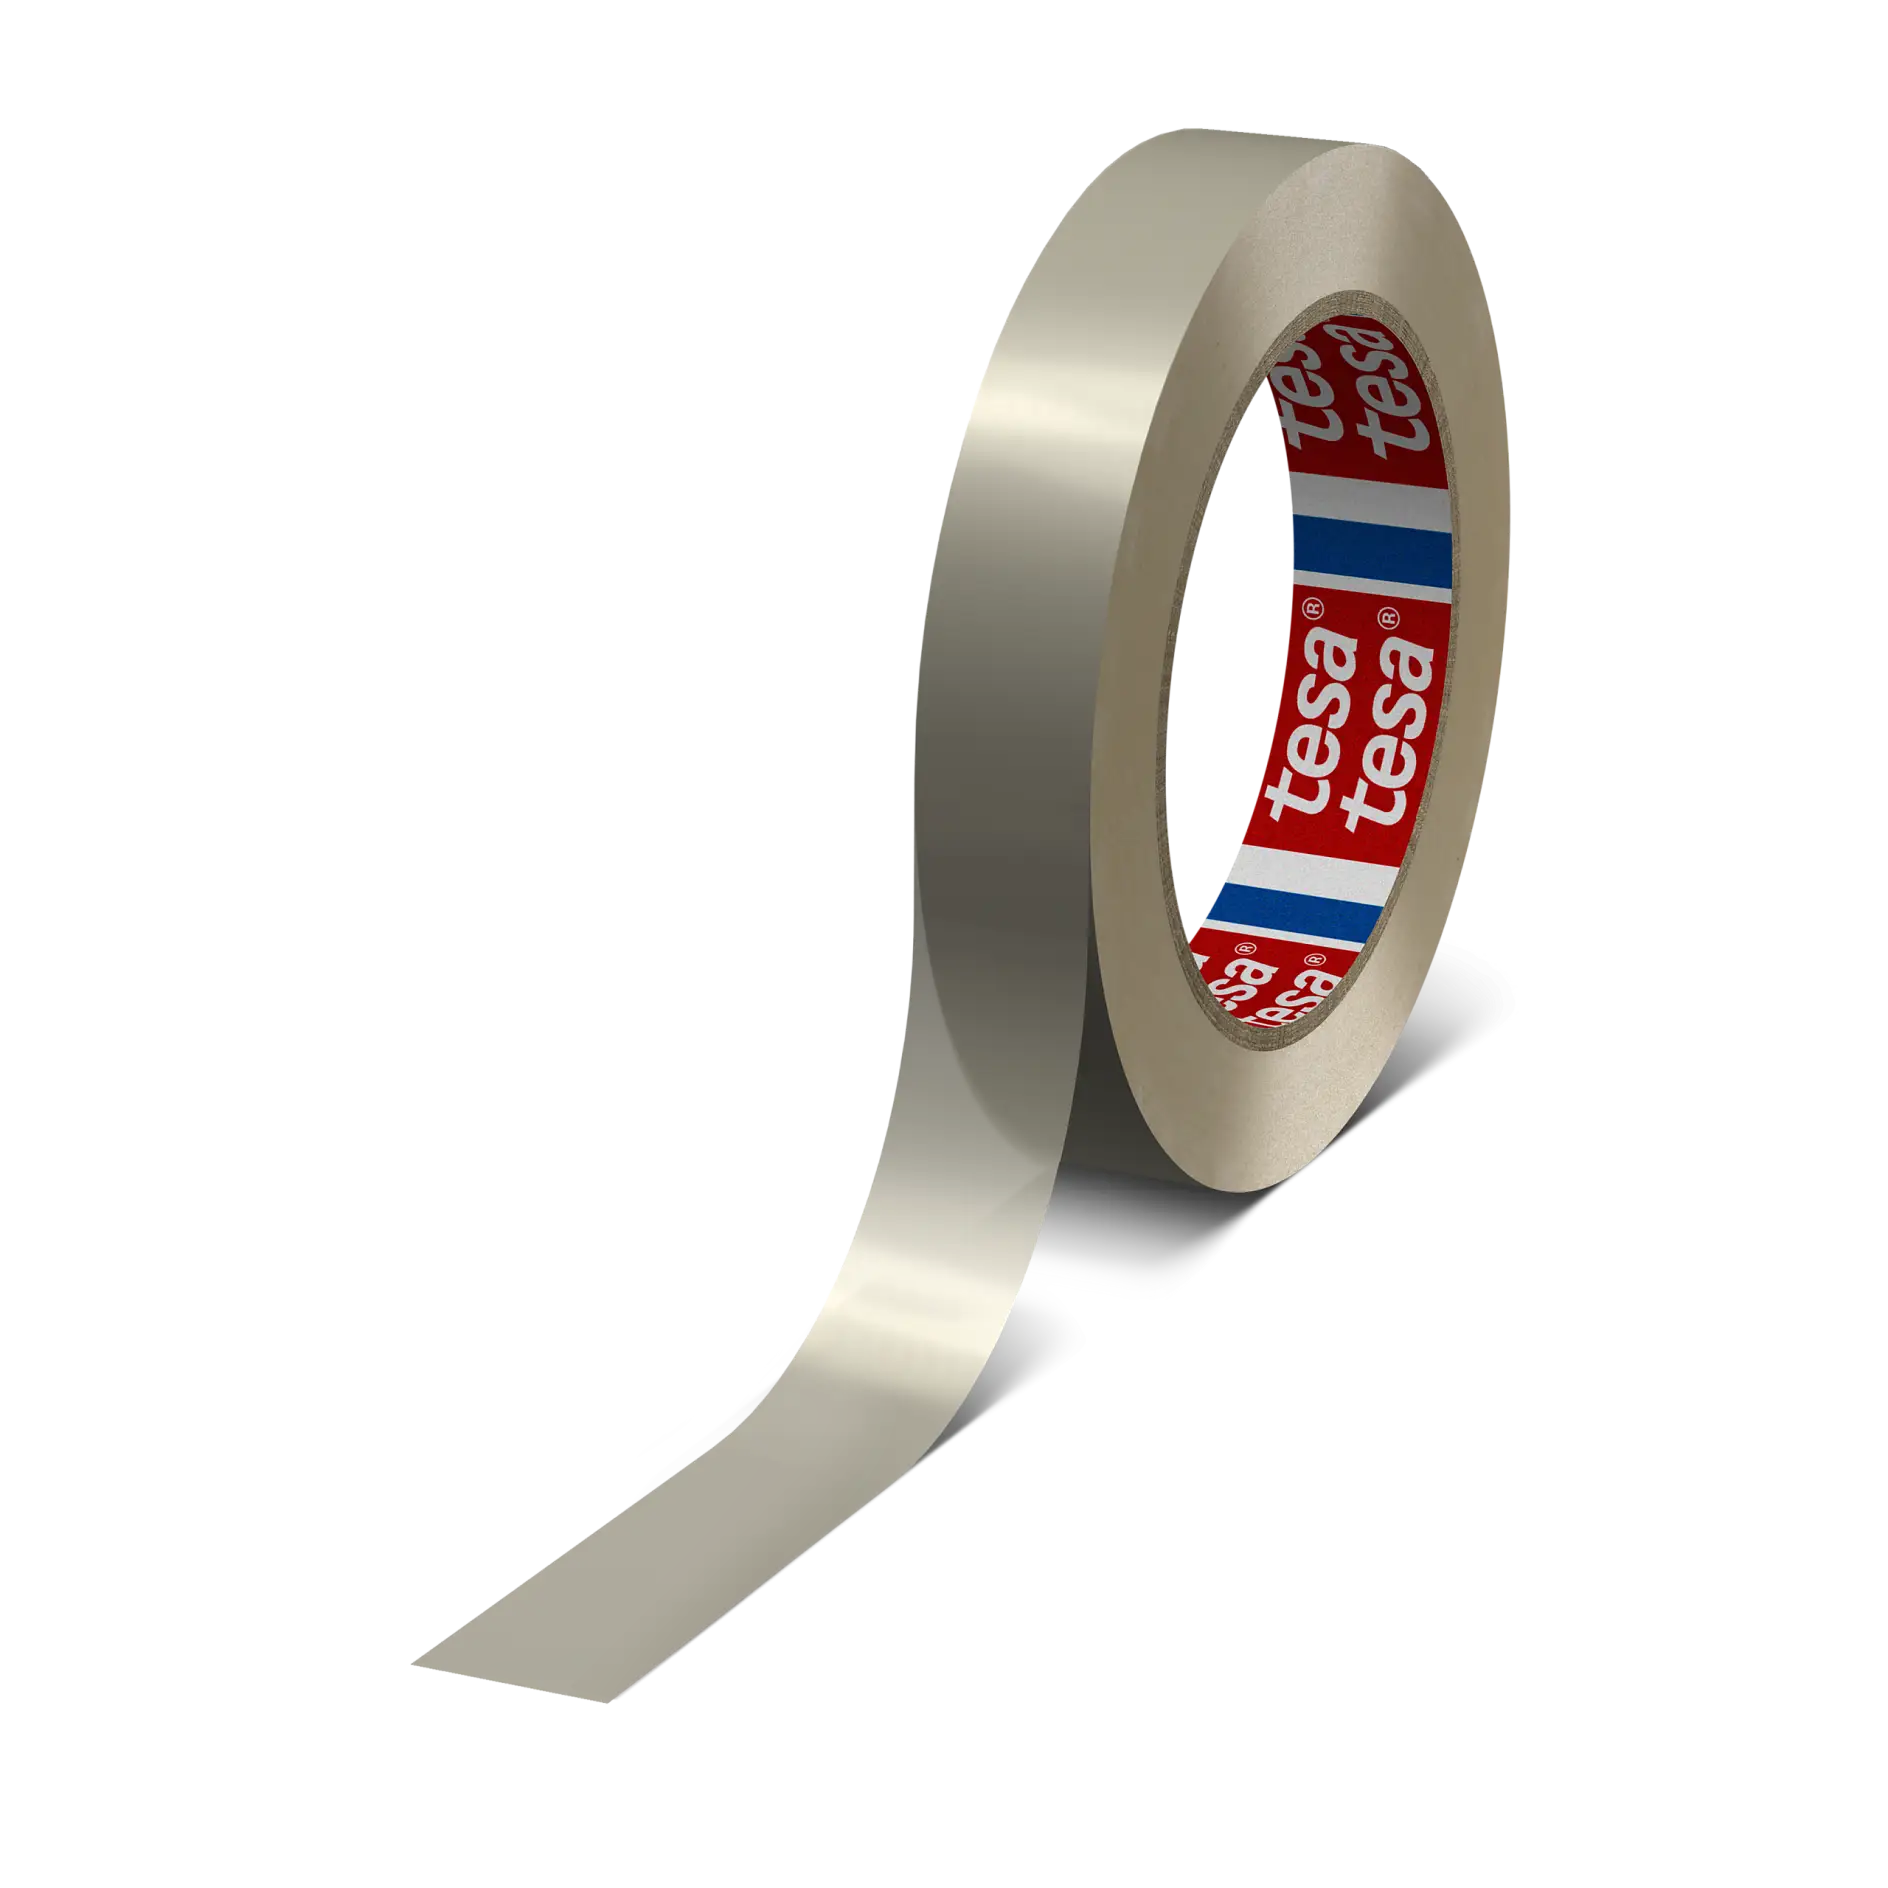 With tesa® 51128 you have the ideal tape for reliable bundling or palletizing.